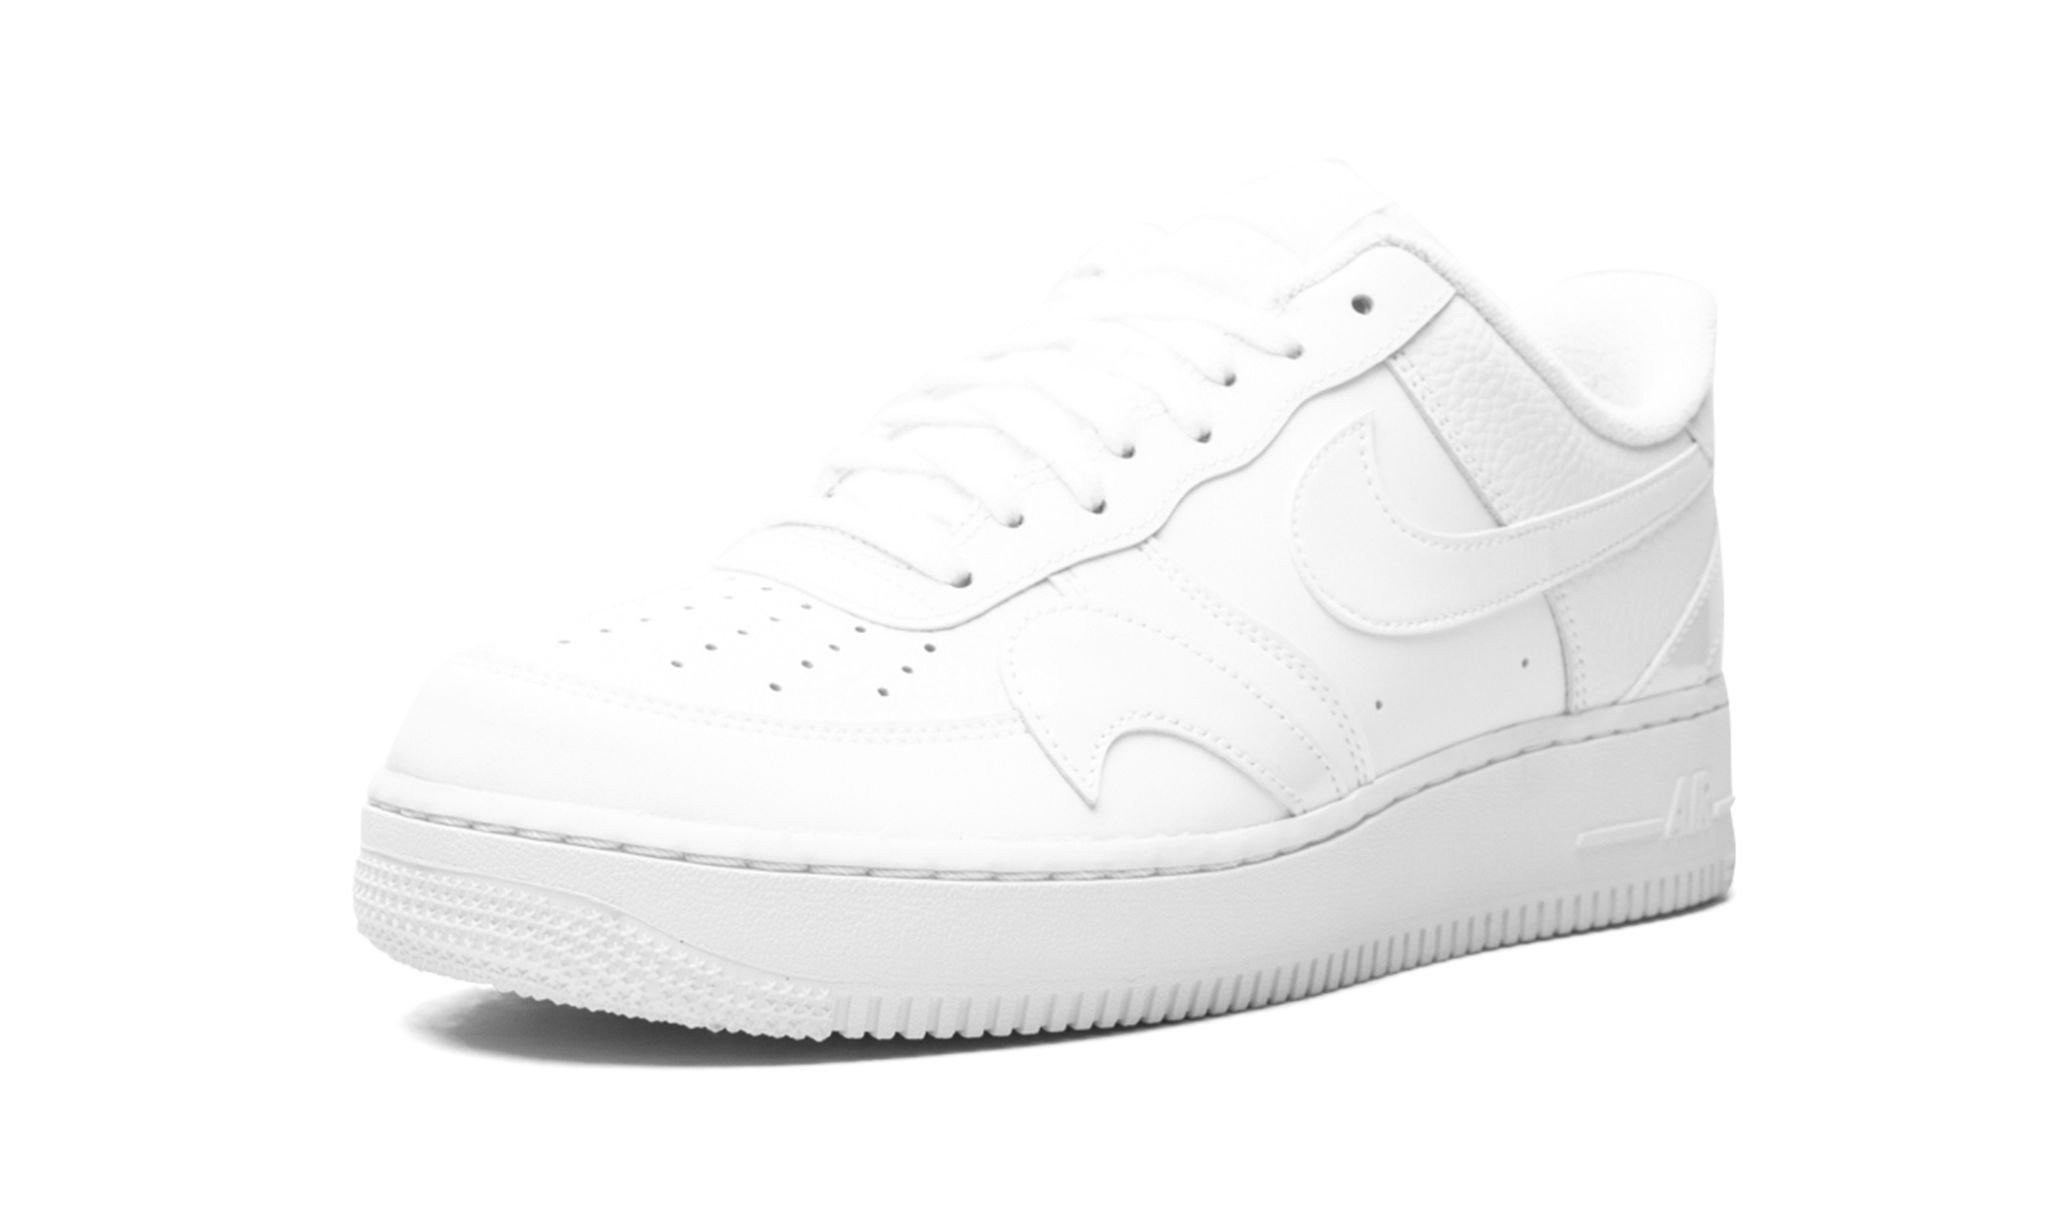 Air Force 1 '07 LV8 "Misplaced Swoosh - Triple White" - 4